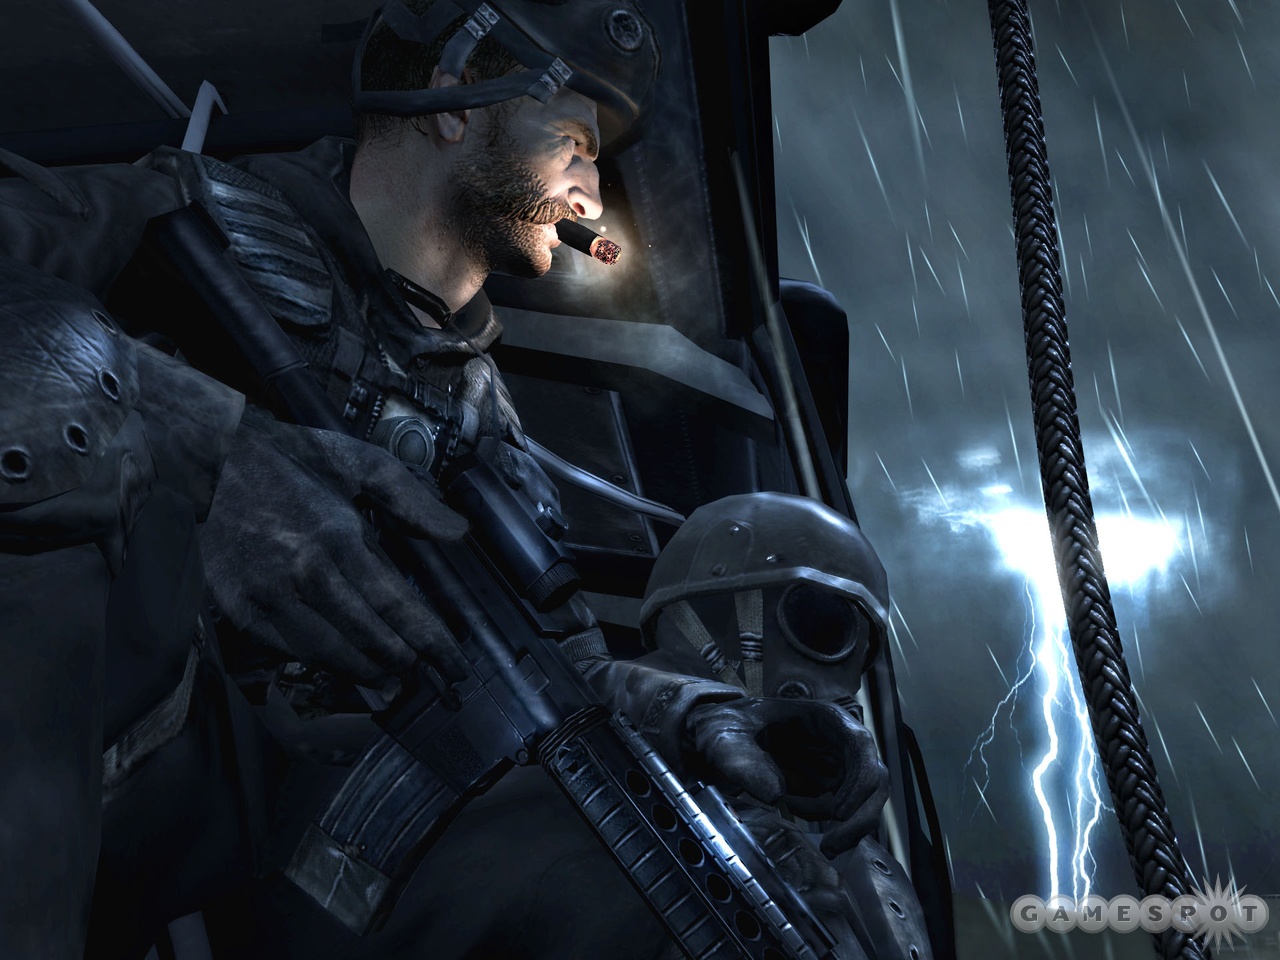 Call of Duty 4 will also offer brand-new multiplayer options to go with its intense action.